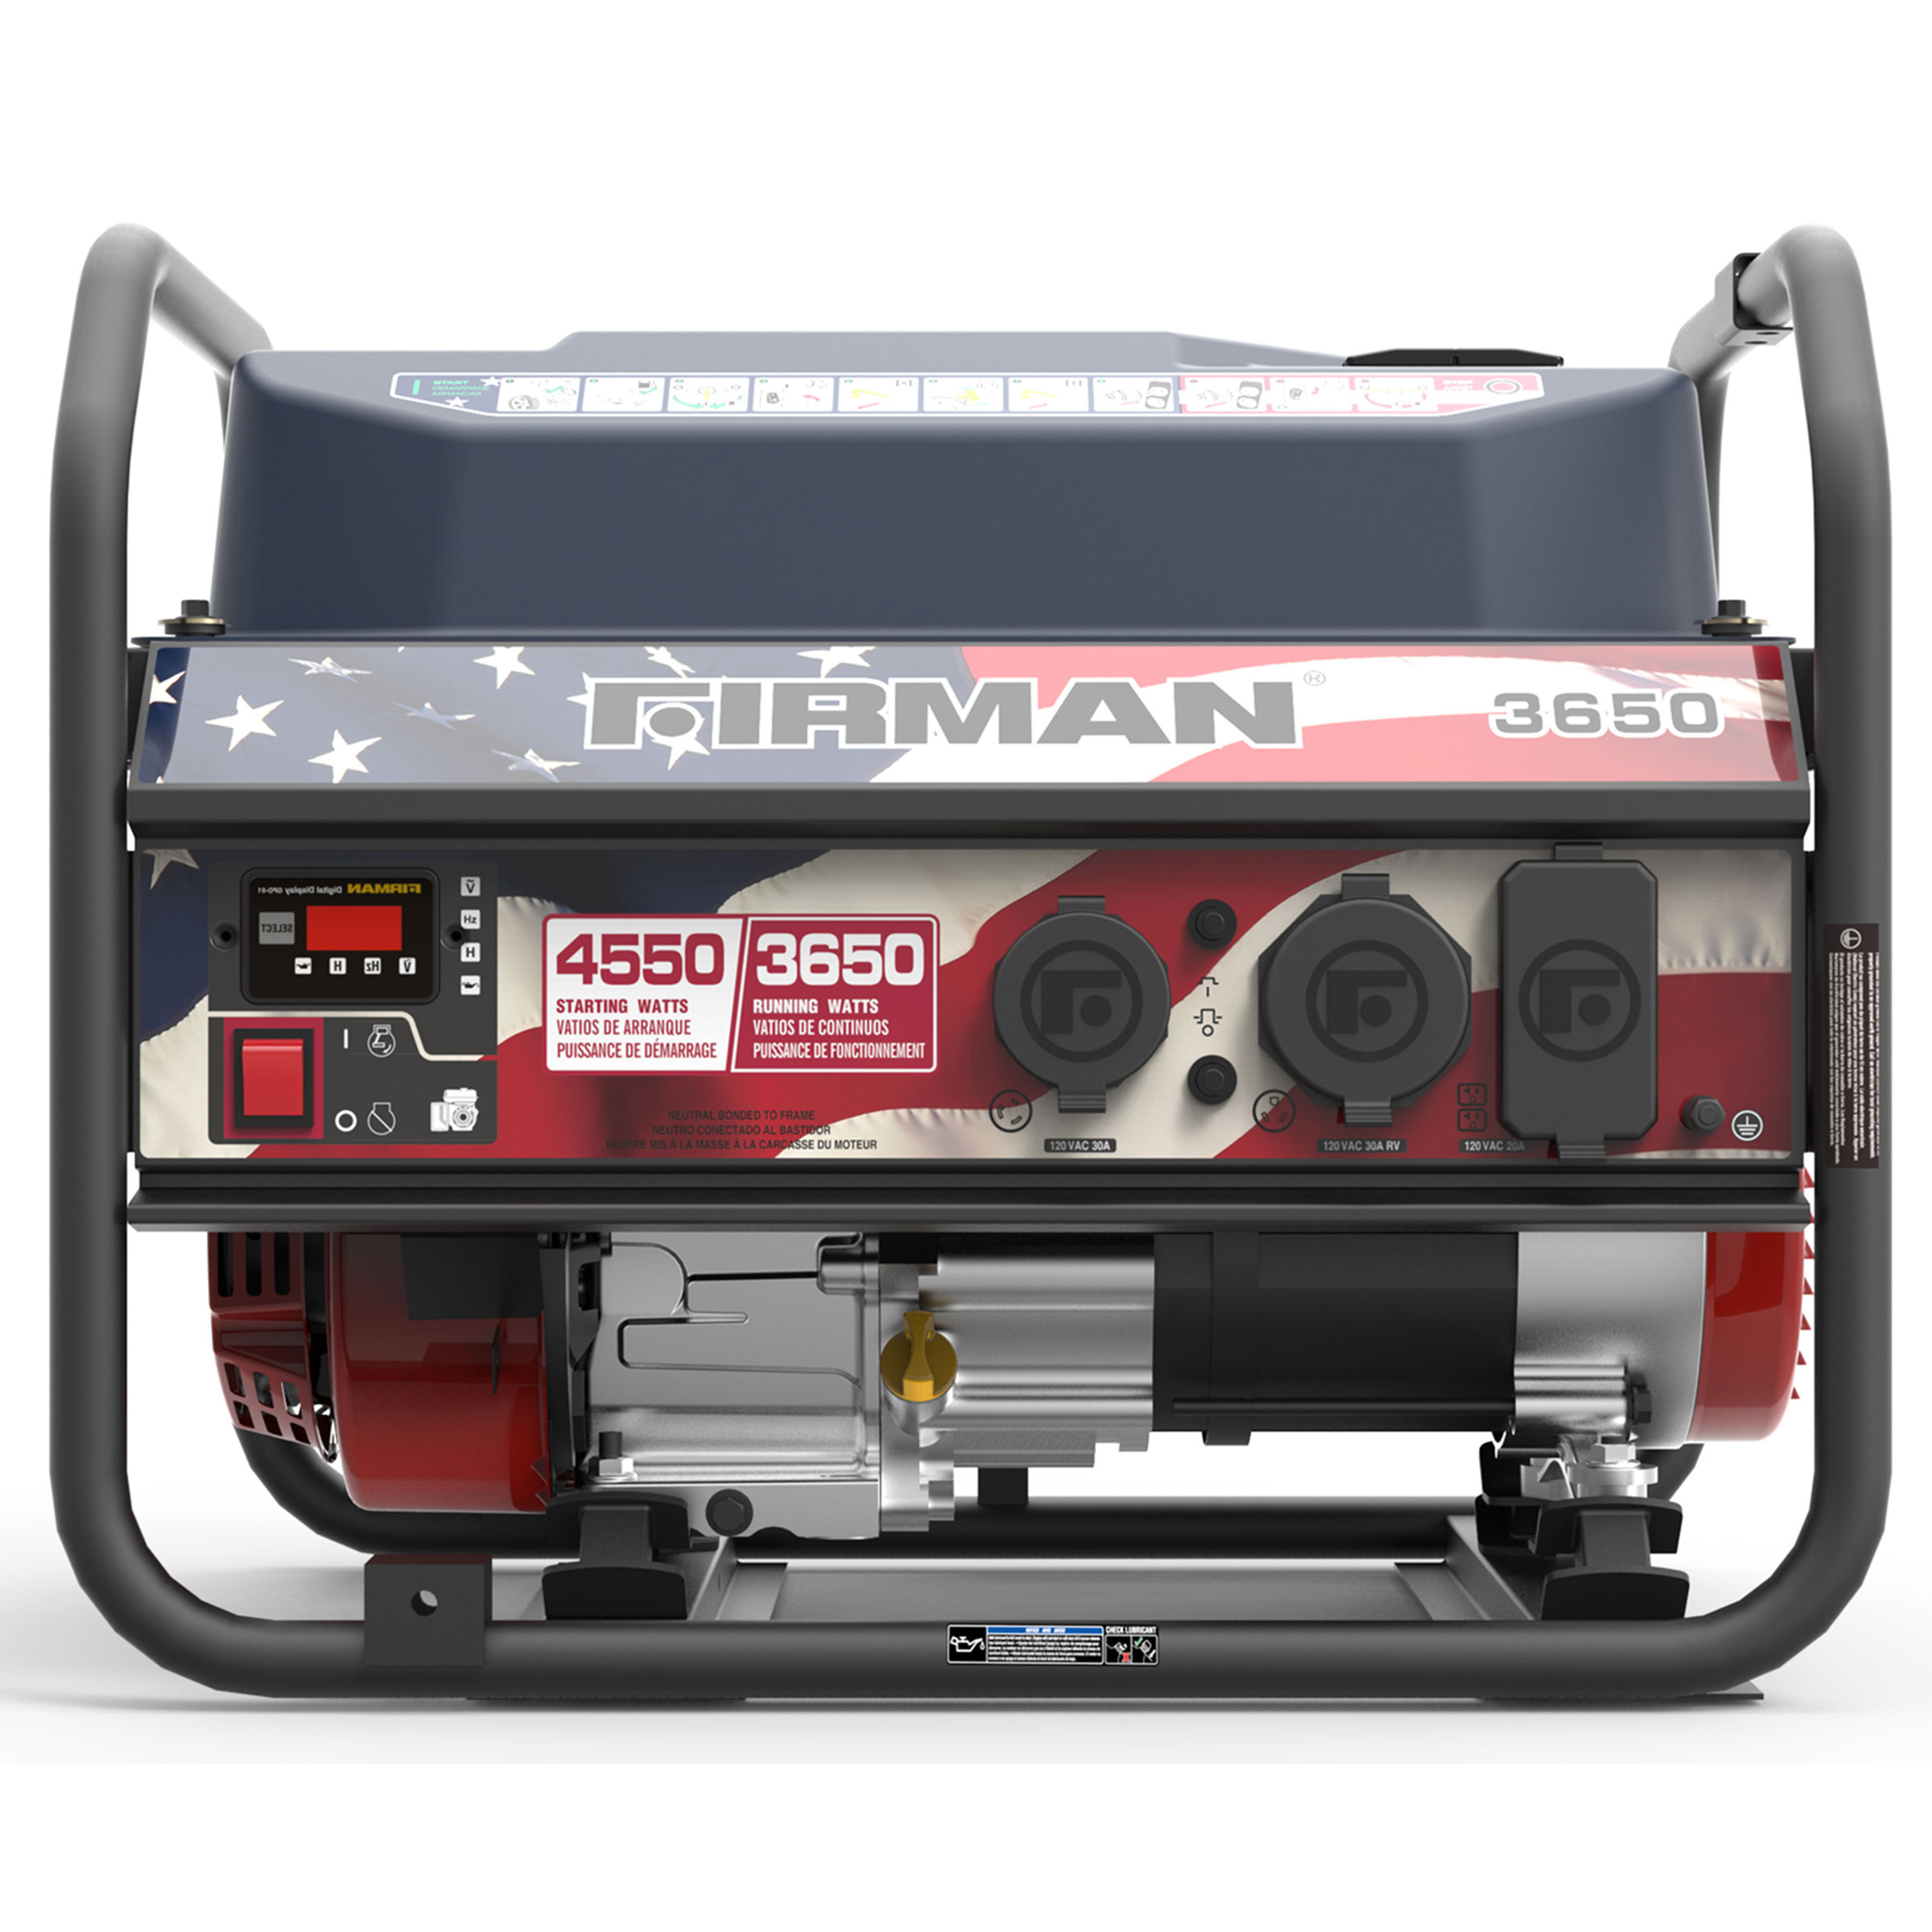 P03611 Gas Powered 3650/4550 Watt Portable Generator- Red, White, And Blue Edition